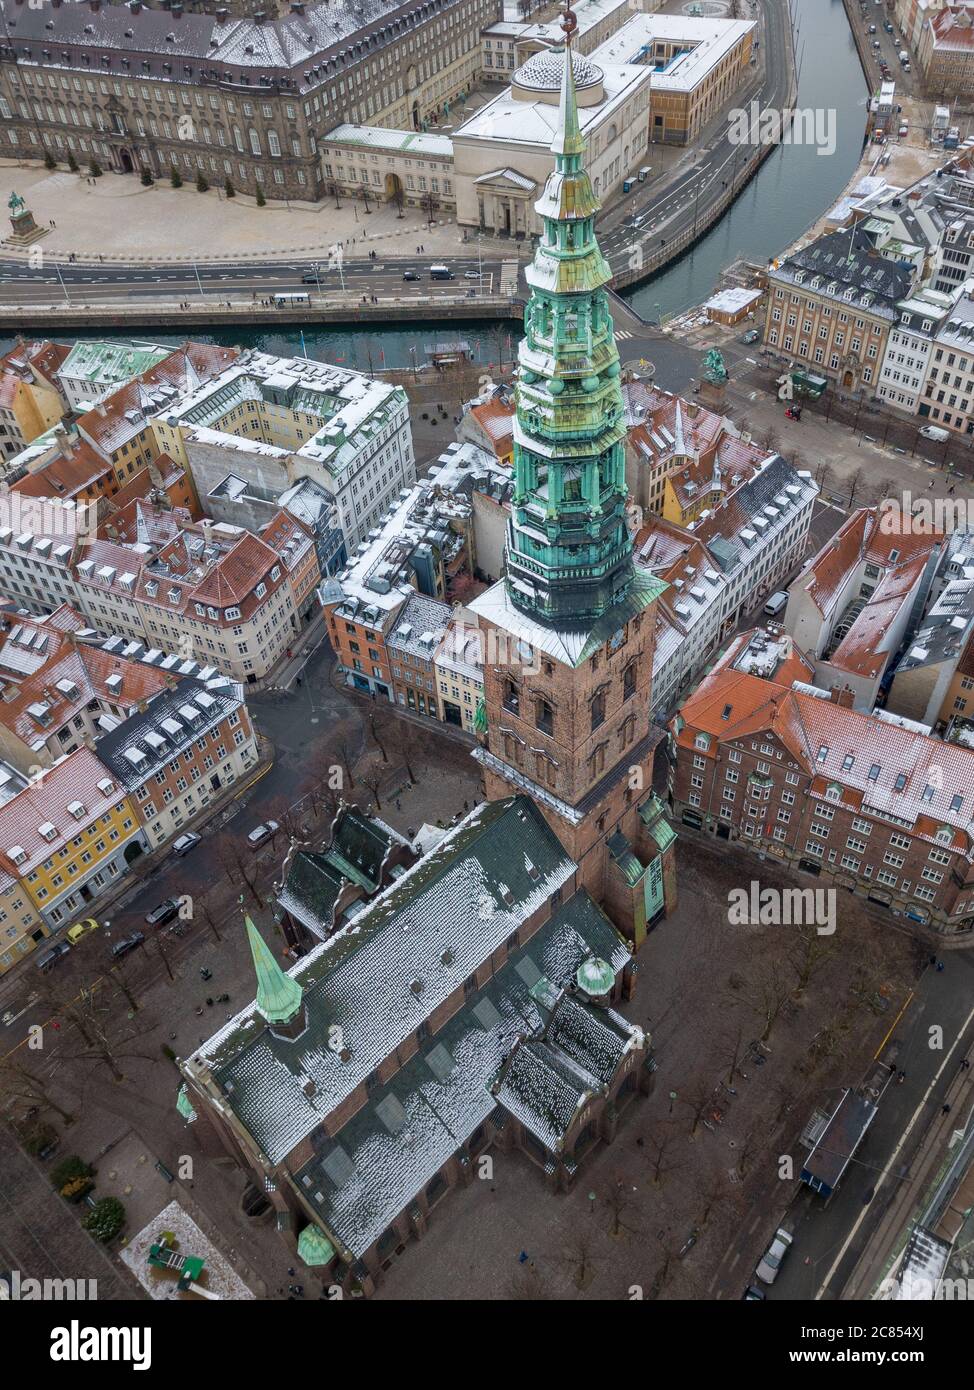 Copenhagen, Denmark - December 24 2018: An aerial photograph of the Nikolaj Kunsthal Contemporary Arts Centre, housed in the old church of St Nicholas Stock Photo